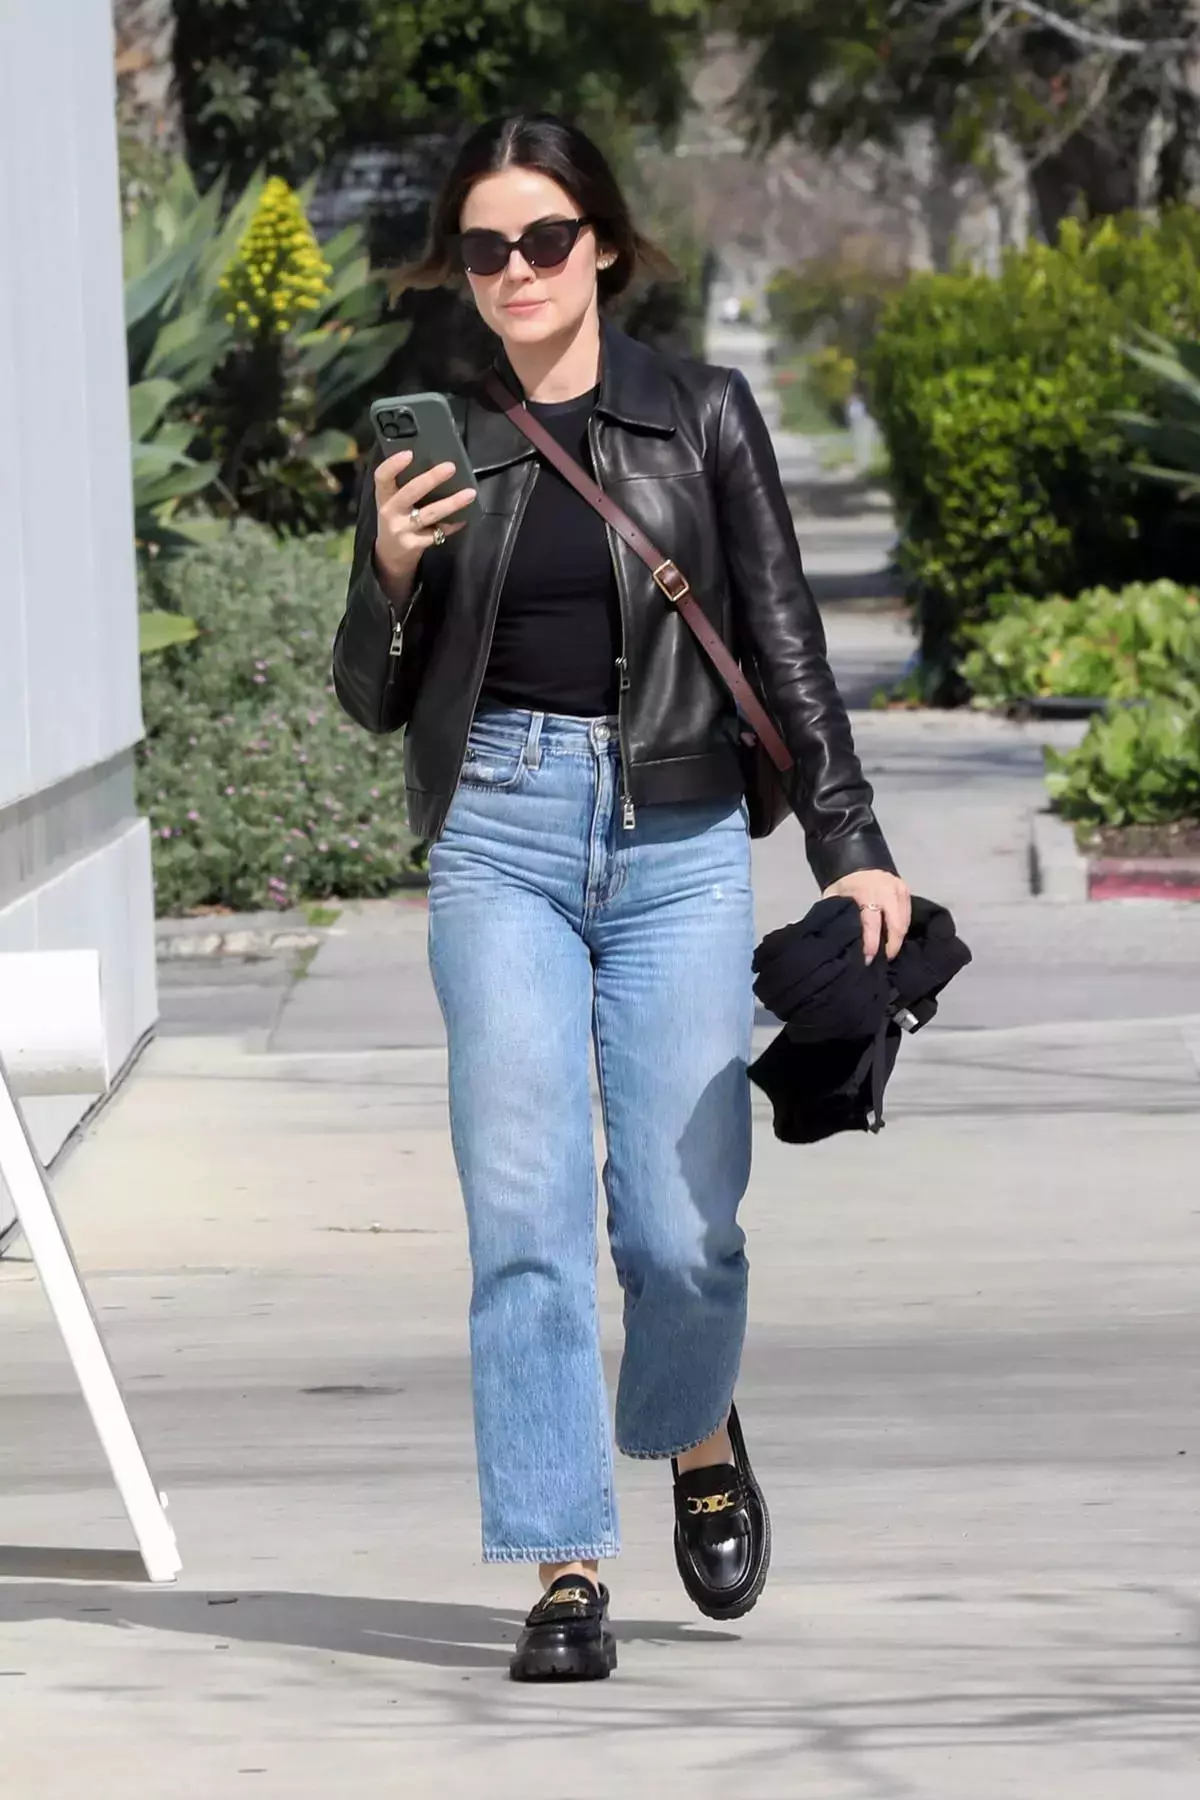 Lucy Hale rocks a leather jacket and jeans while grabbing some lunch to go at Catch Steak in West Hollywood California